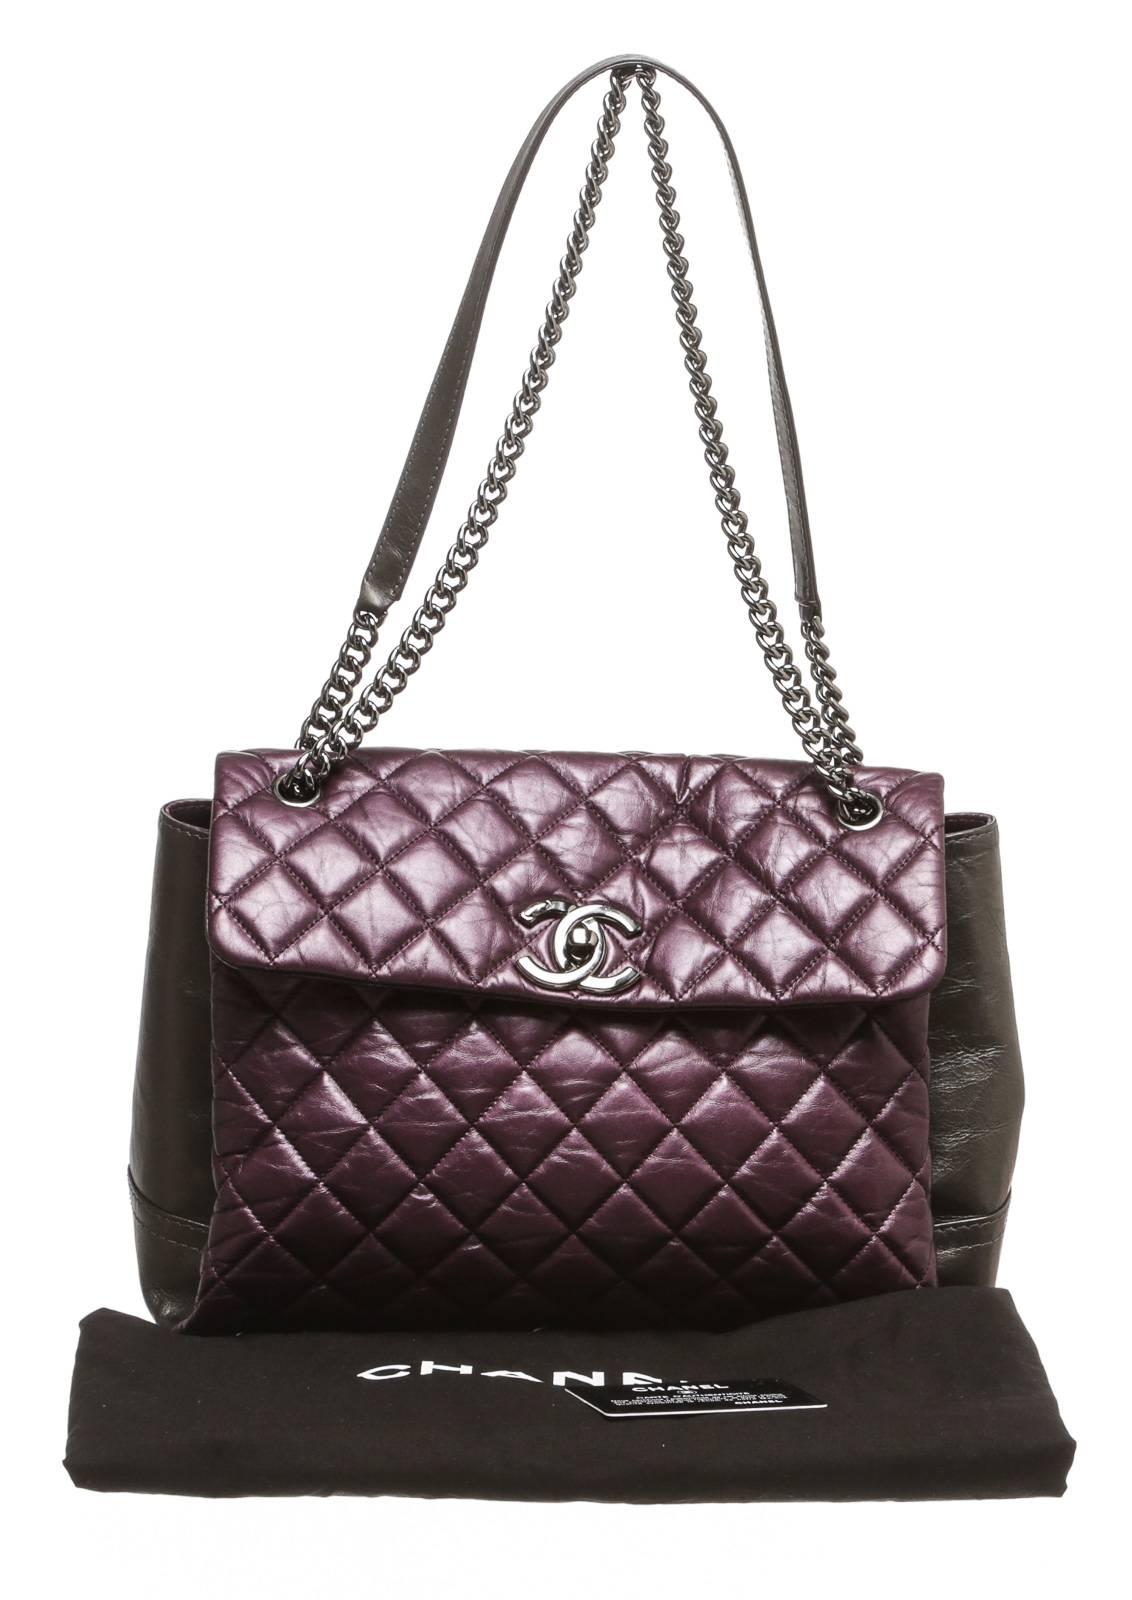 Show off your signature style with this gorgeous Chanel handbag. This fabulous handbag is called the Lady Pearly and thanks to the iridescent leather, you'll know why. This bi-color bag is featured in purple and gray with silver tone hardware.